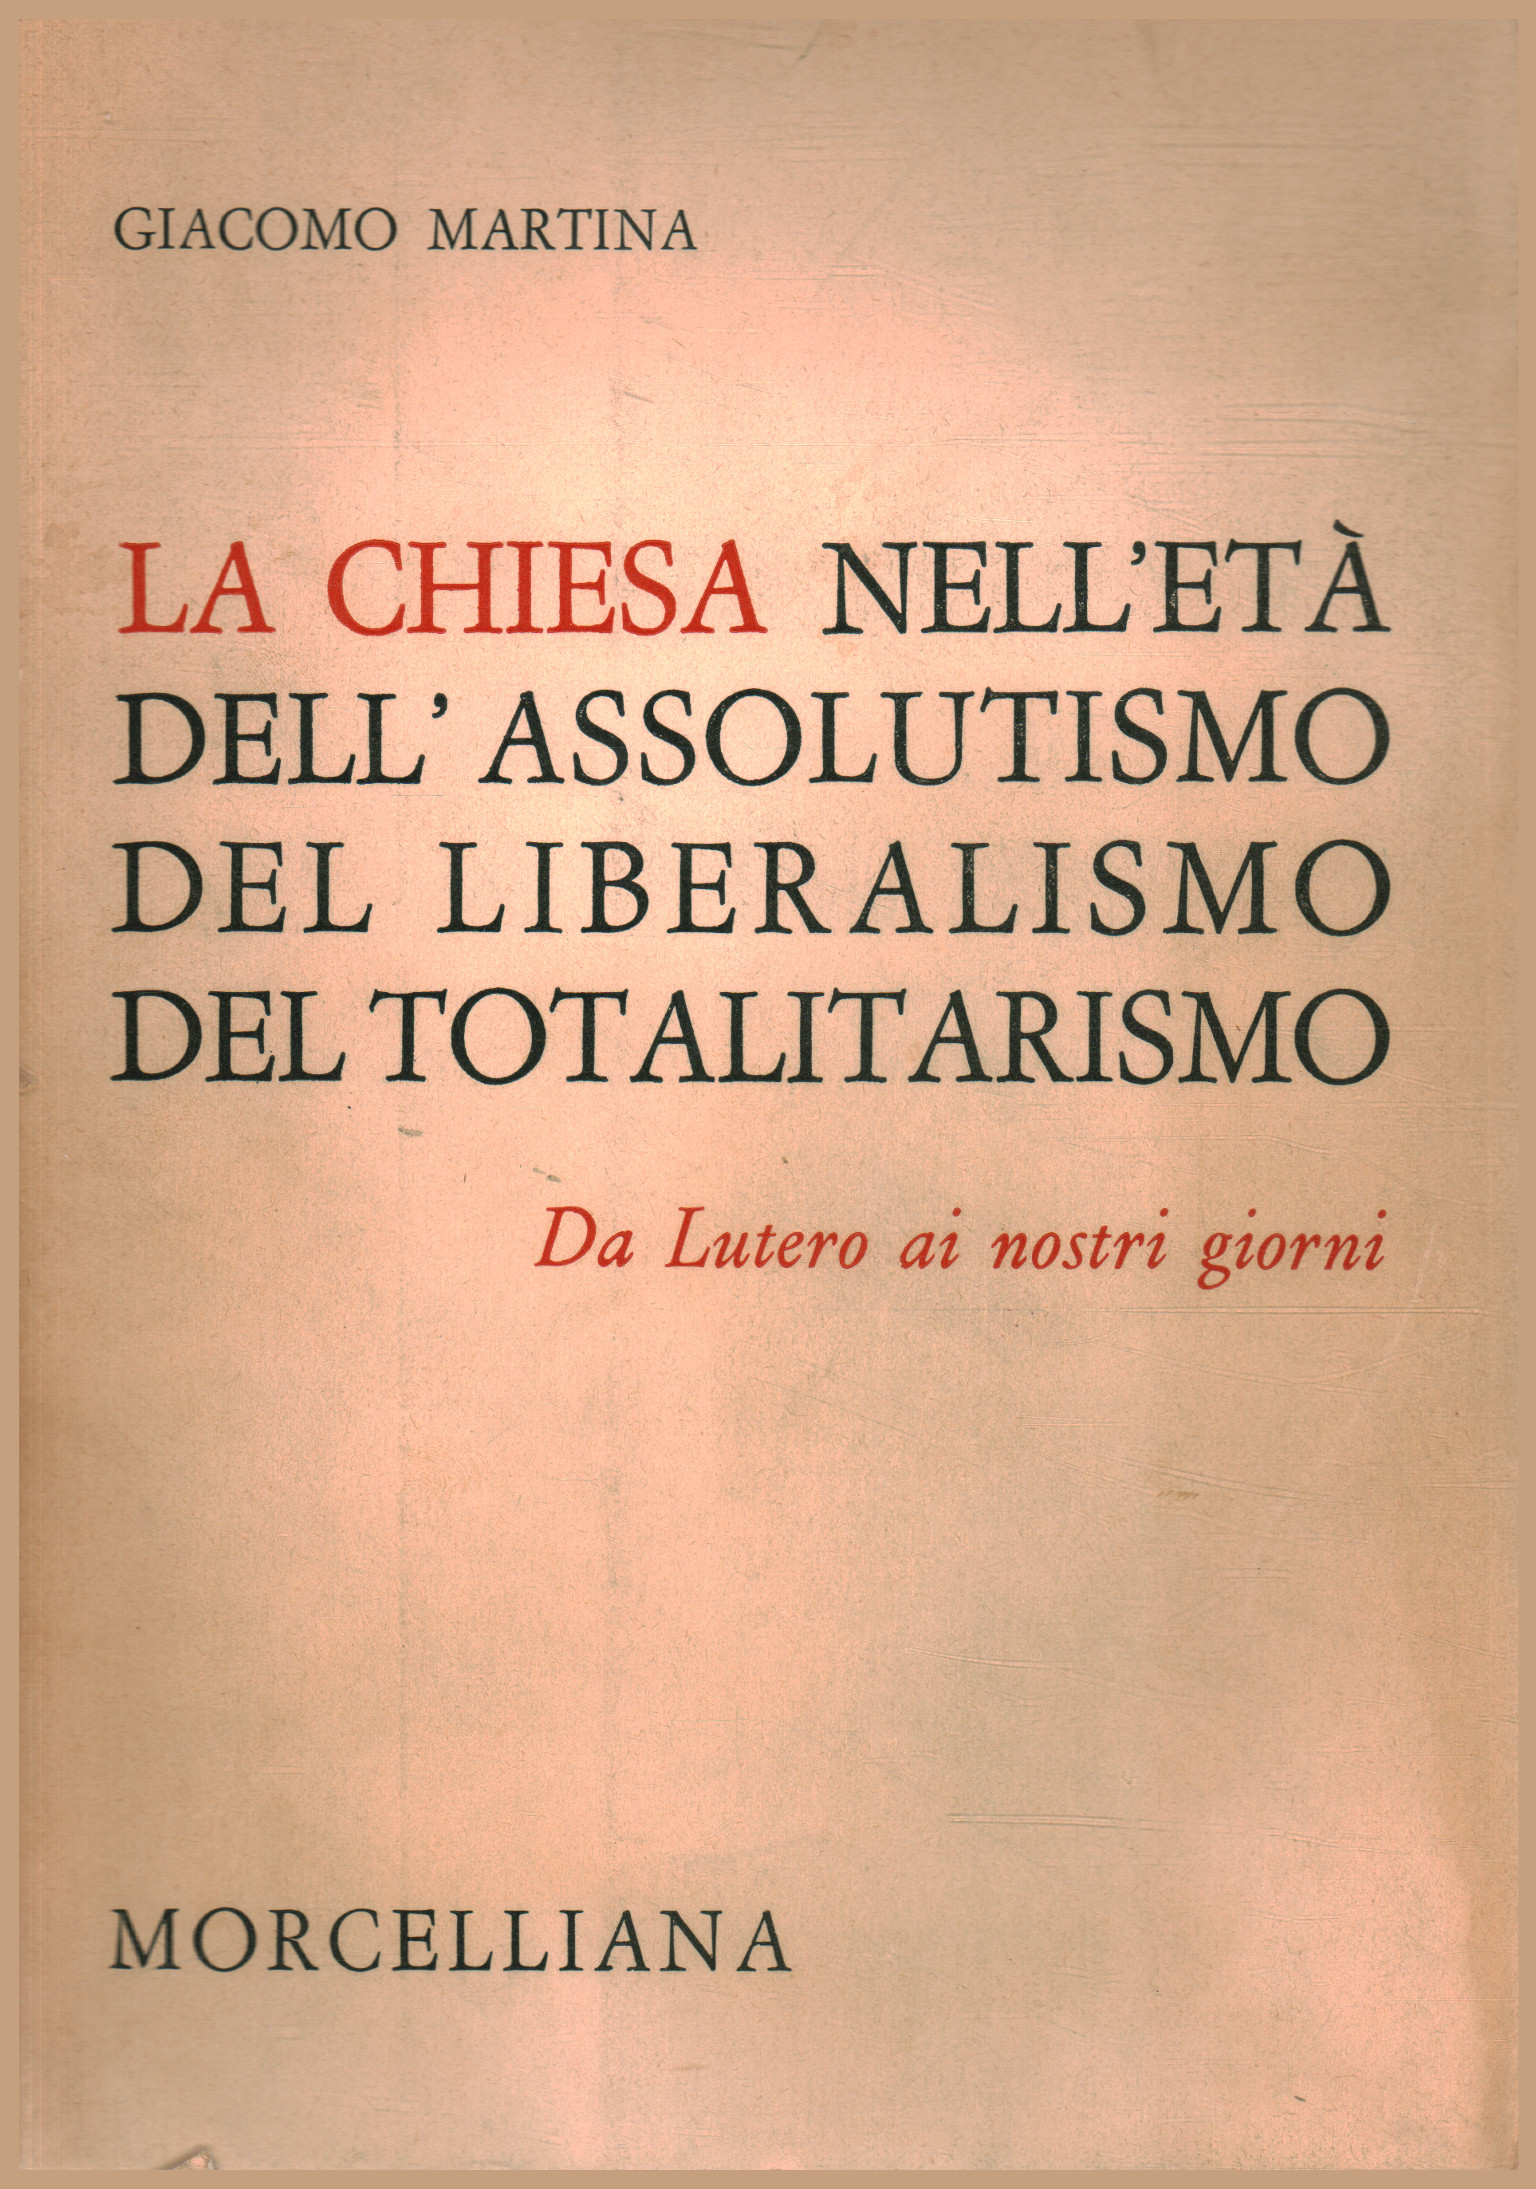 The church in the age of liberal absolutism, Giacomo Martina